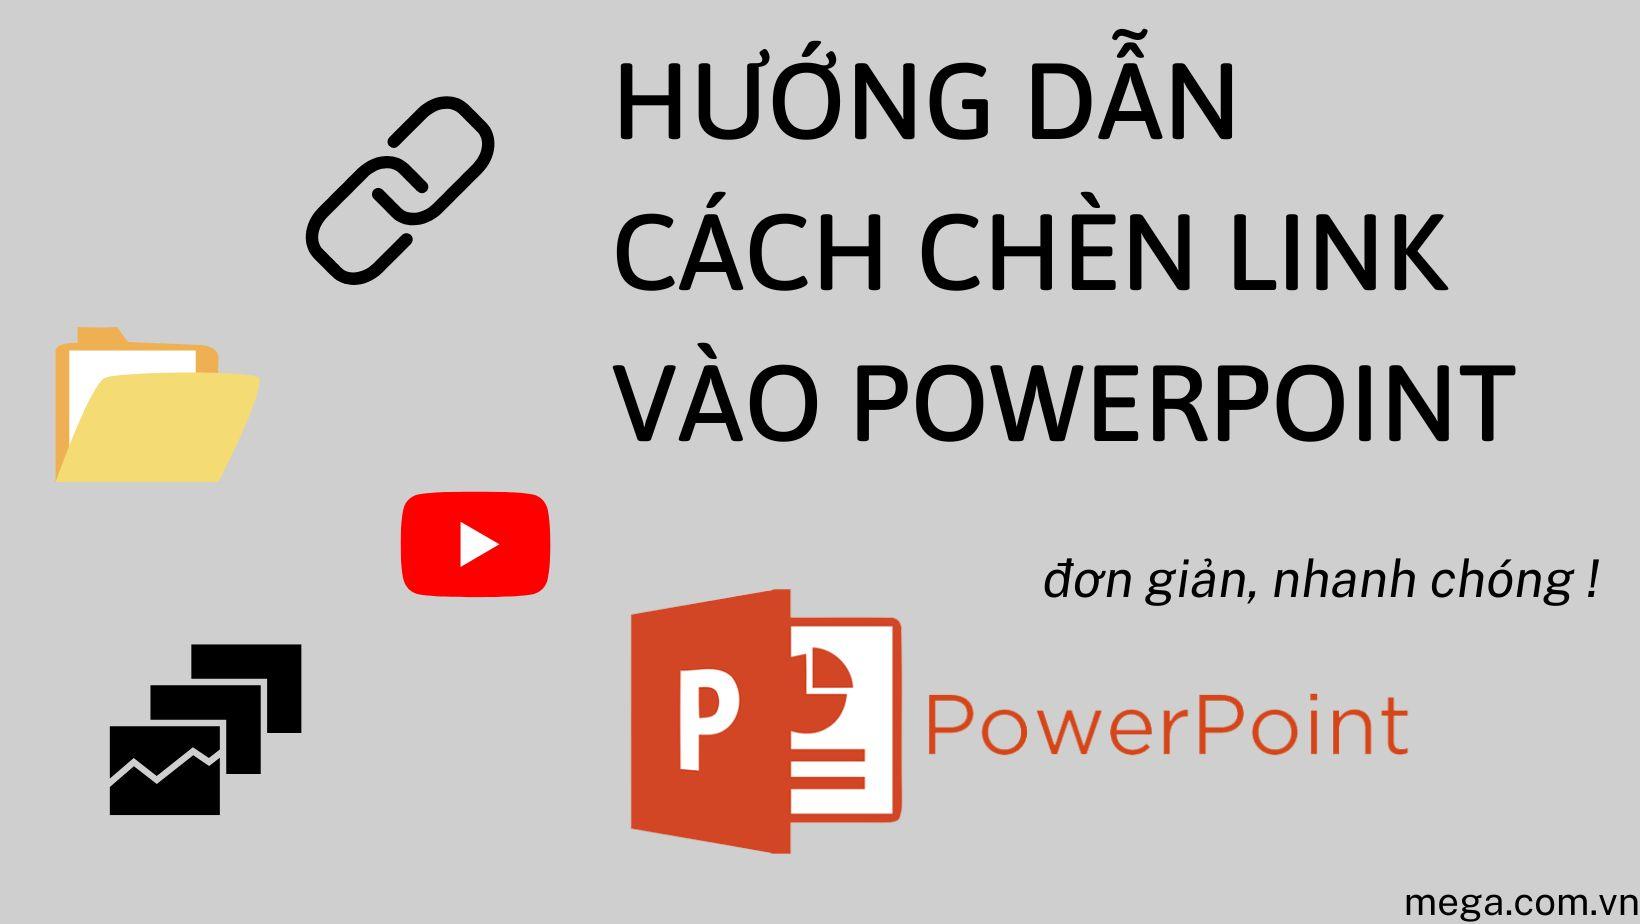 Link vào PowerPoint